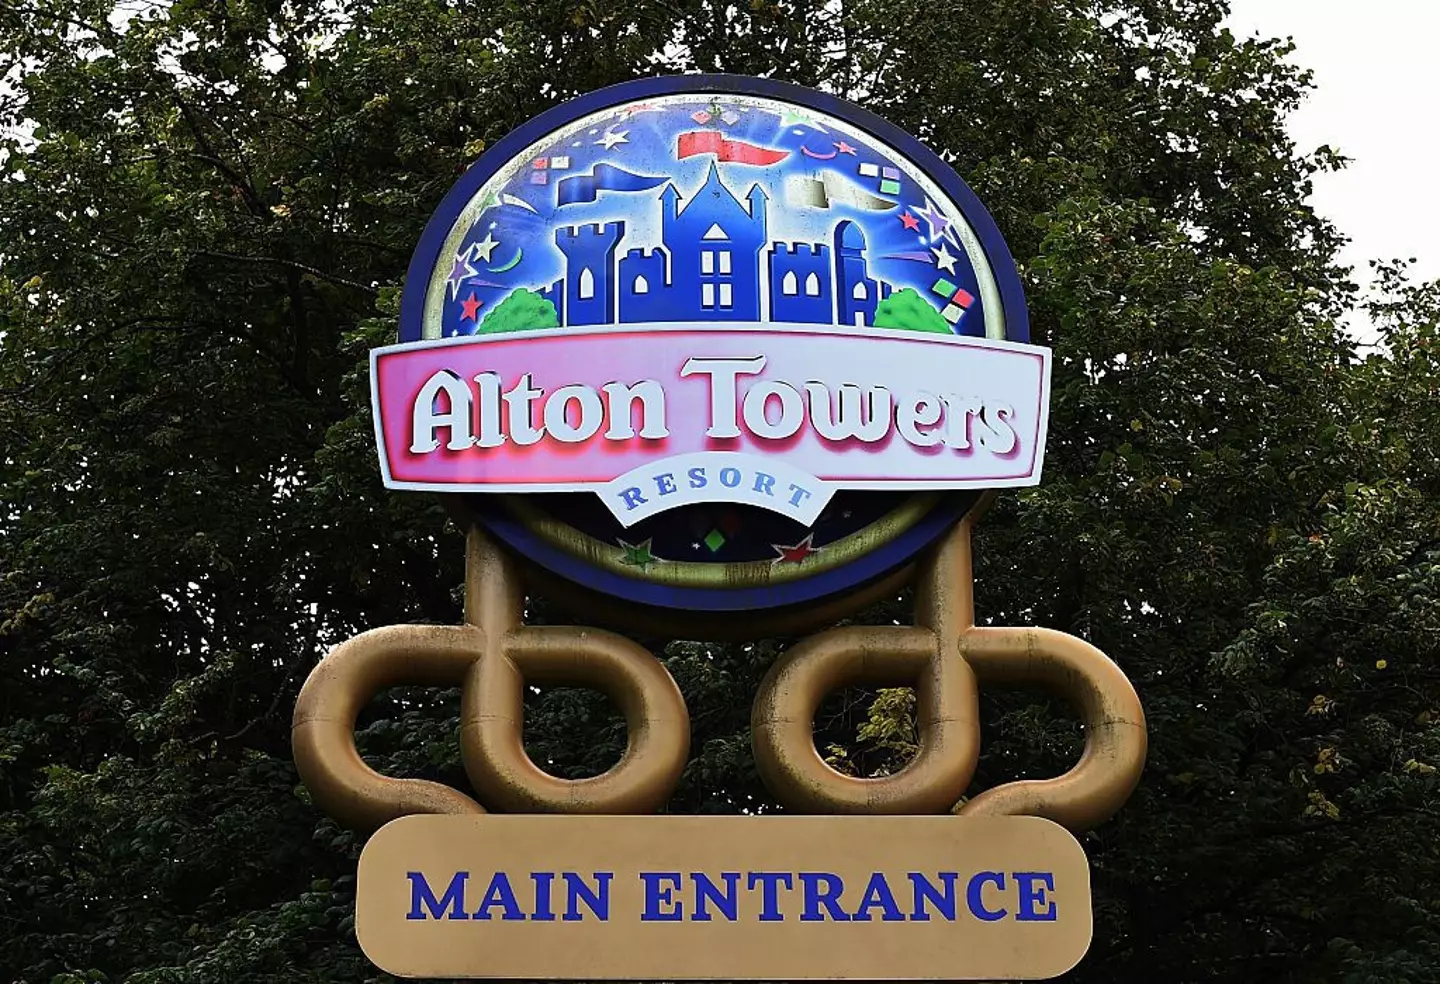 Alton Towers has closed a popular attraction after 21 years.